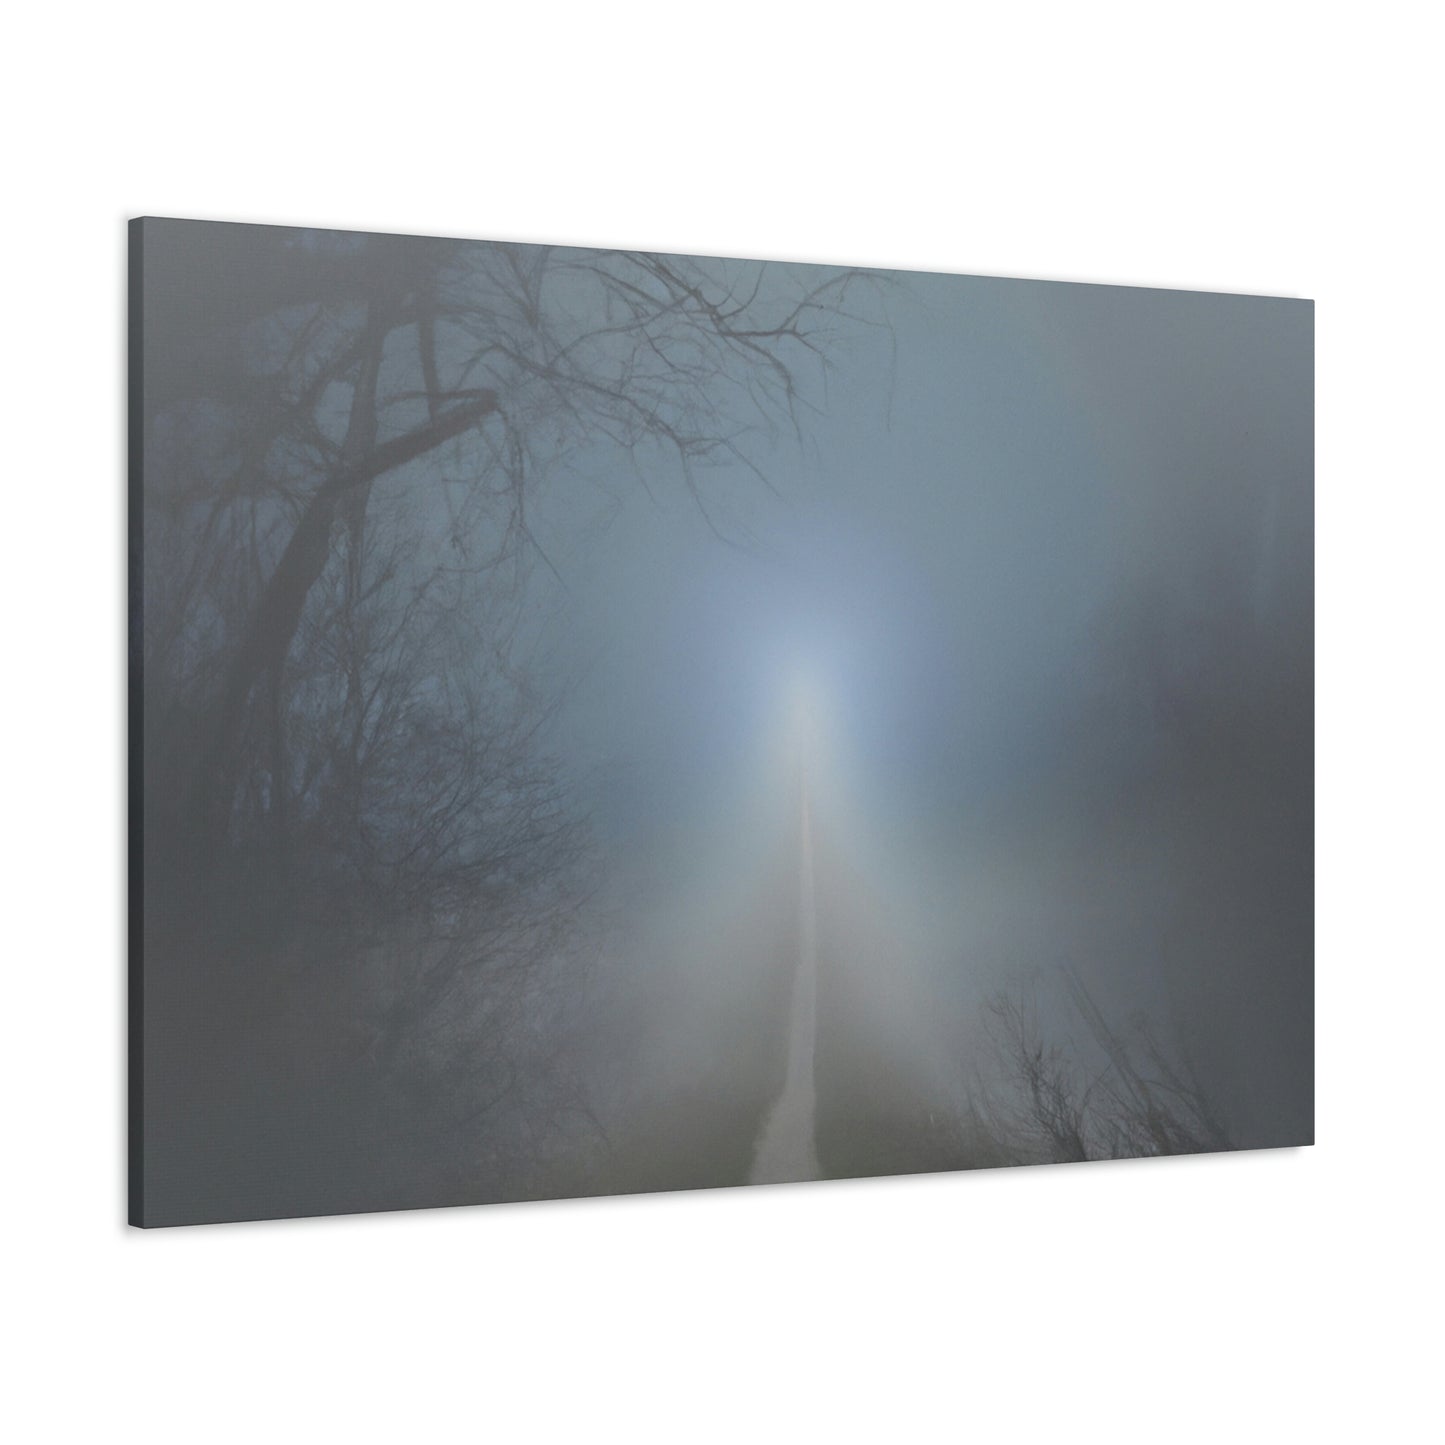 "The Misty Road of Uncertainty" - The Alien Canva